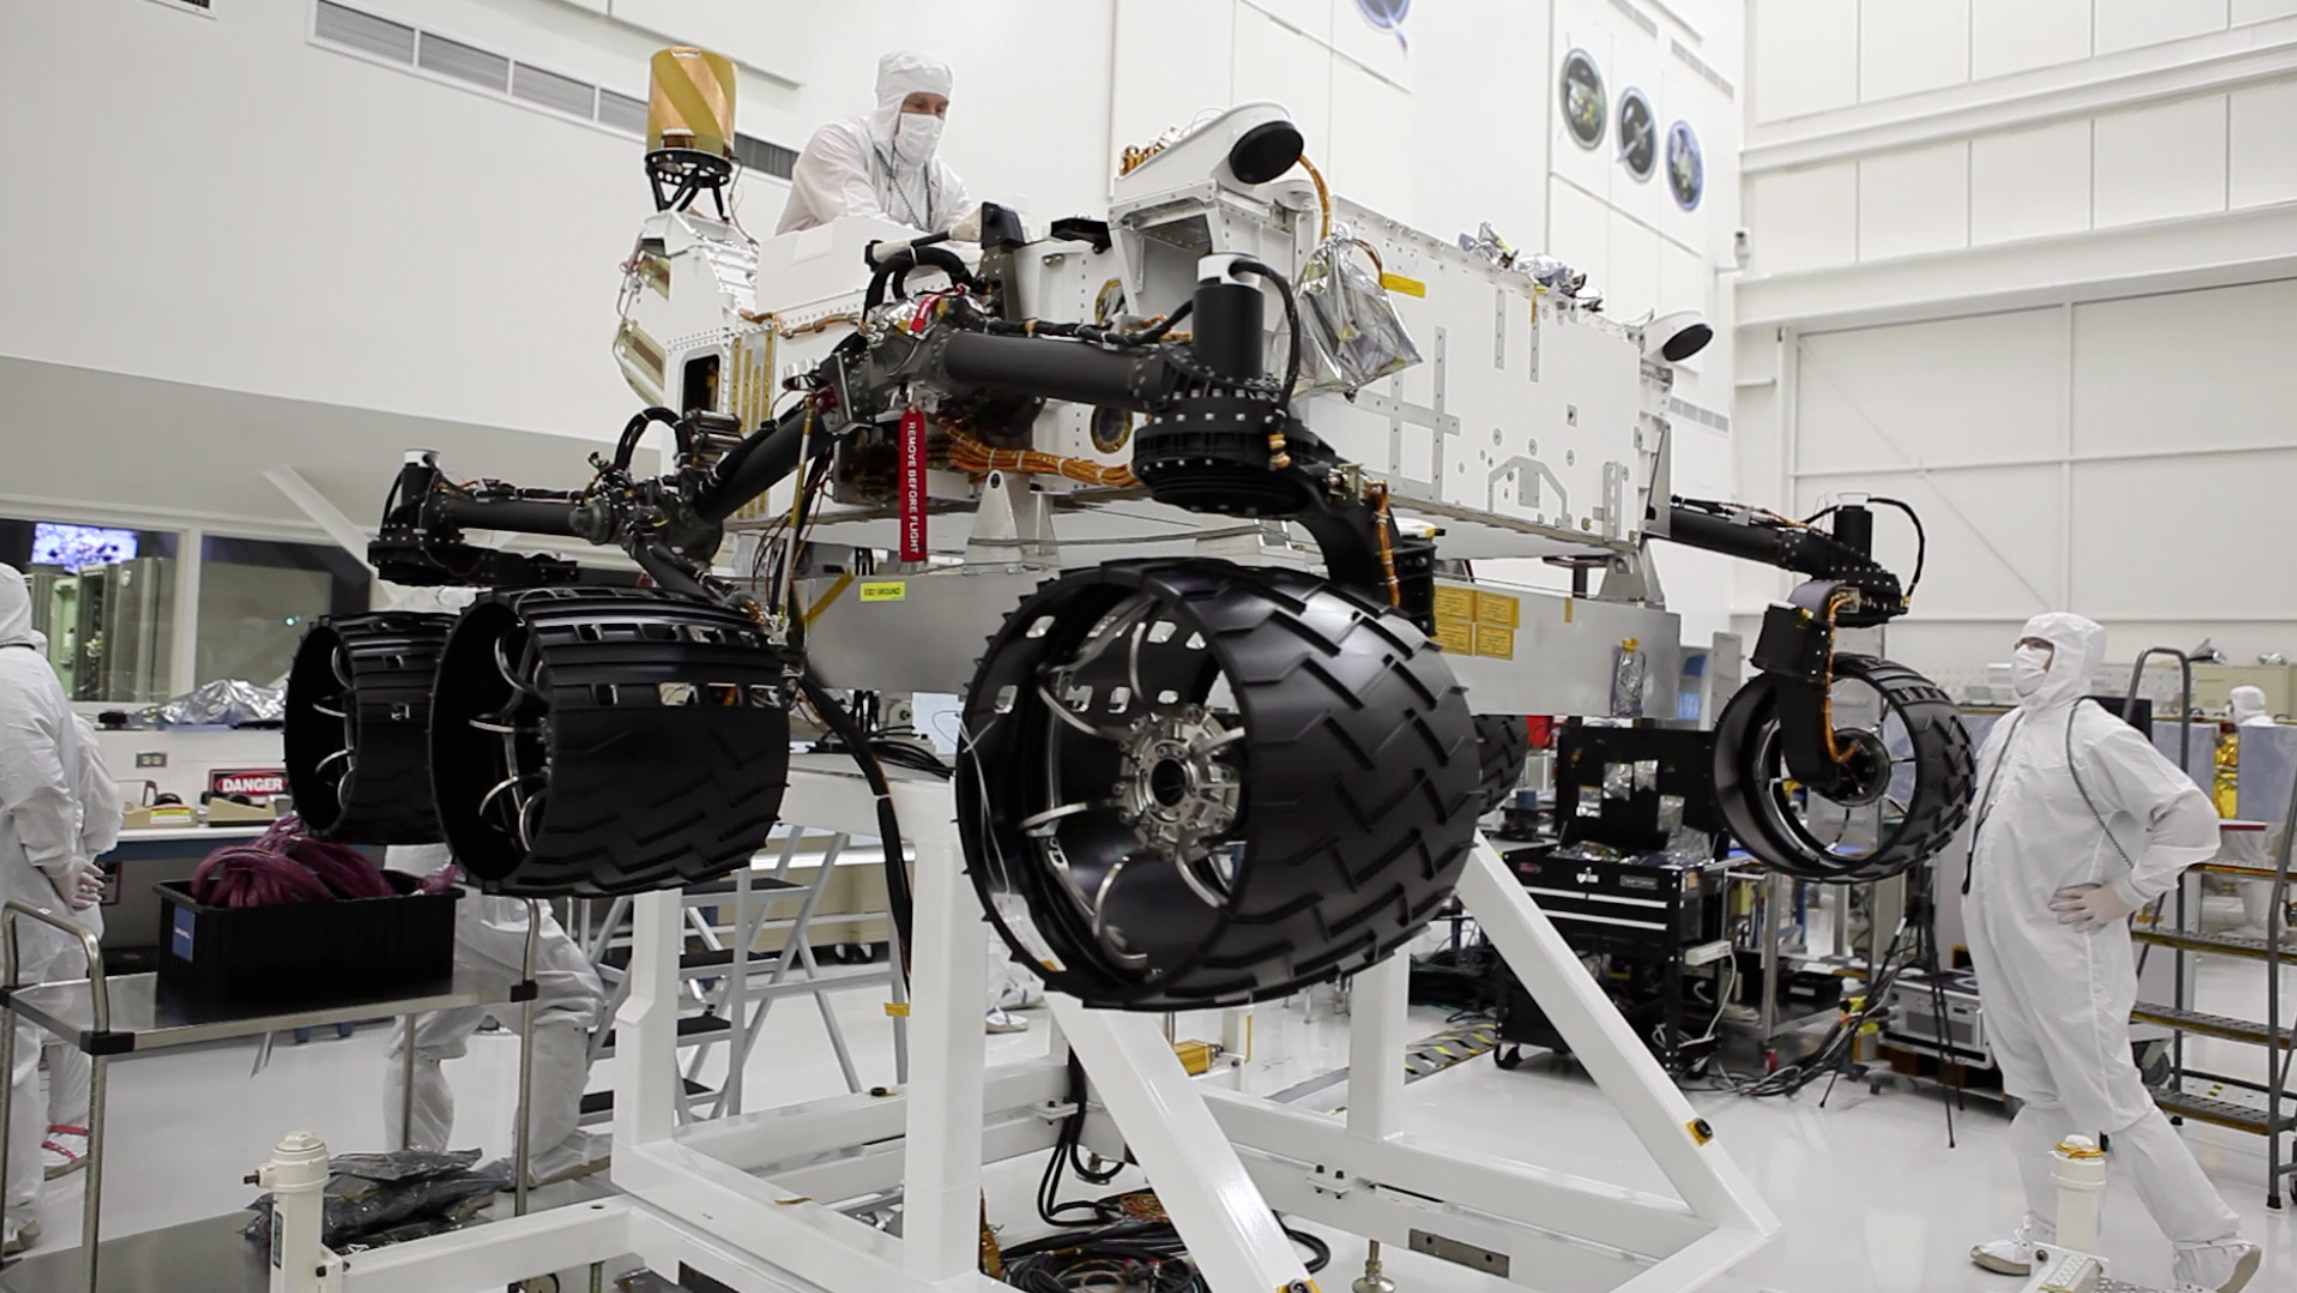 Engineers working in a clean room at NASA's Jet Propulsion Laboratory, installed six new wheels on the Curiosity rover, and rotated all six wheels at once on July 9, 2010.